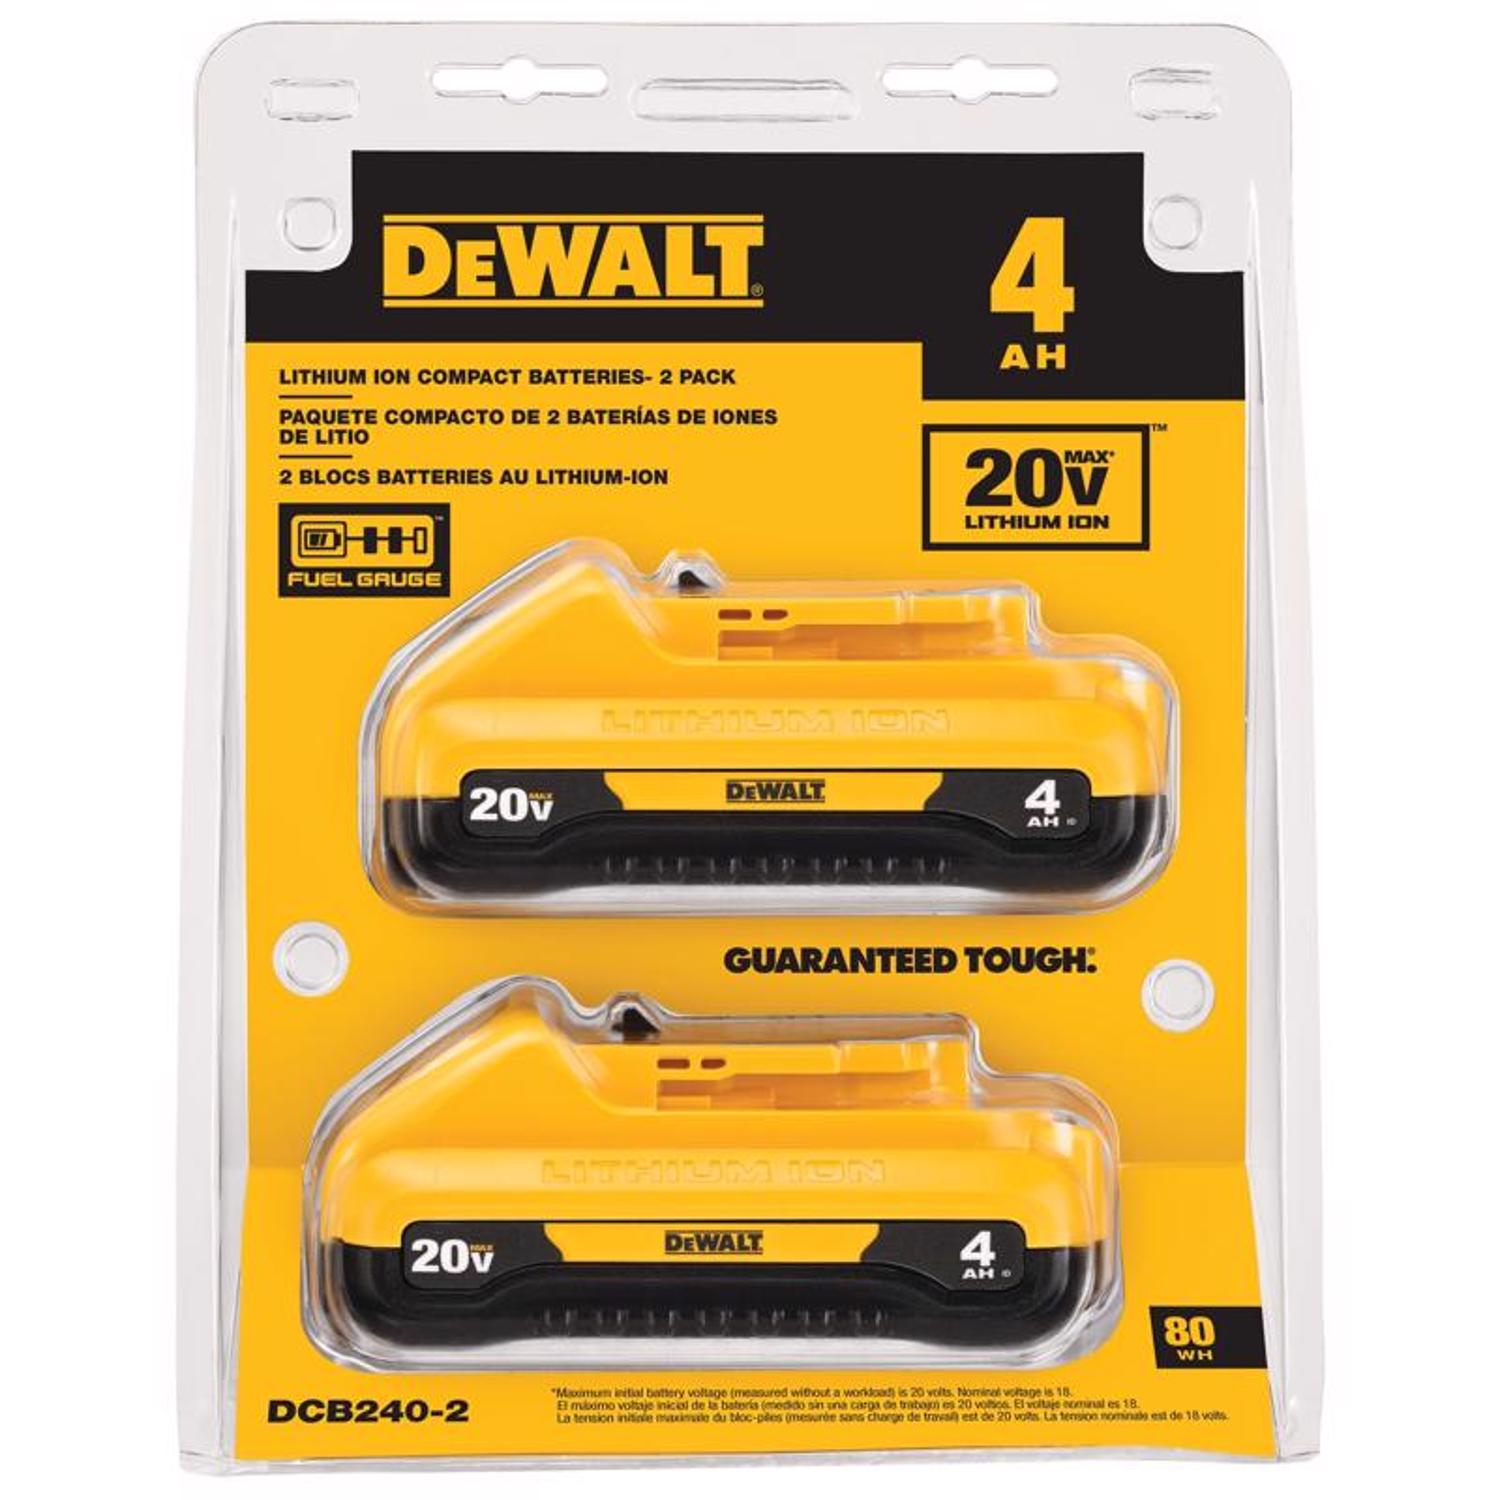 Photos - Power Tool Battery DeWALT 20V MAX DCB240-2 4 Ah Lithium-Ion Compact Battery Combo Pack 2 pc 